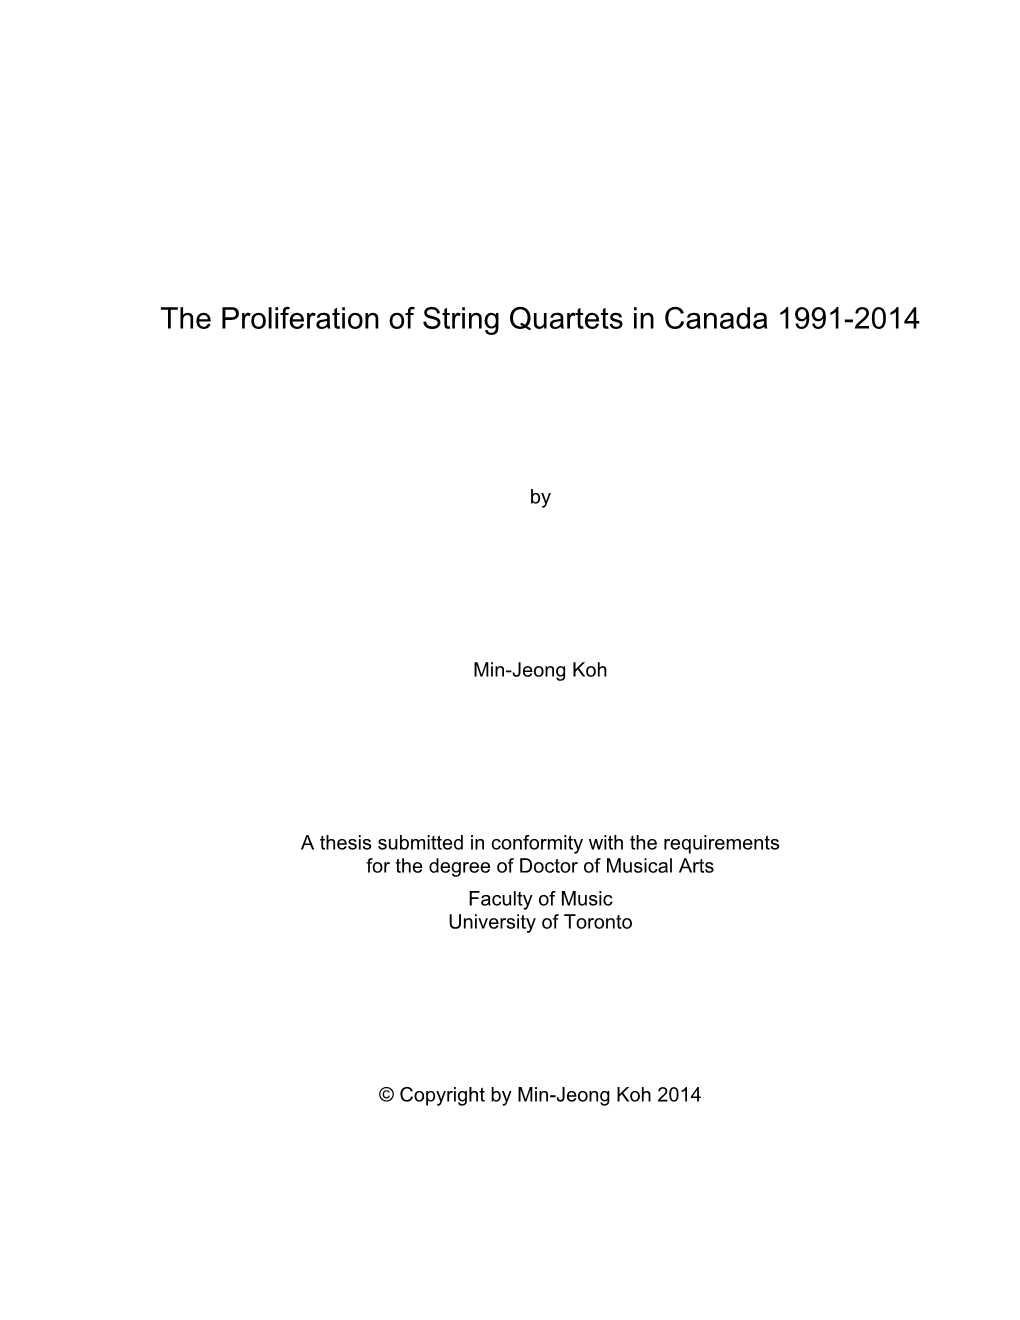 The Proliferation of String Quartets in Canada 1991-2014